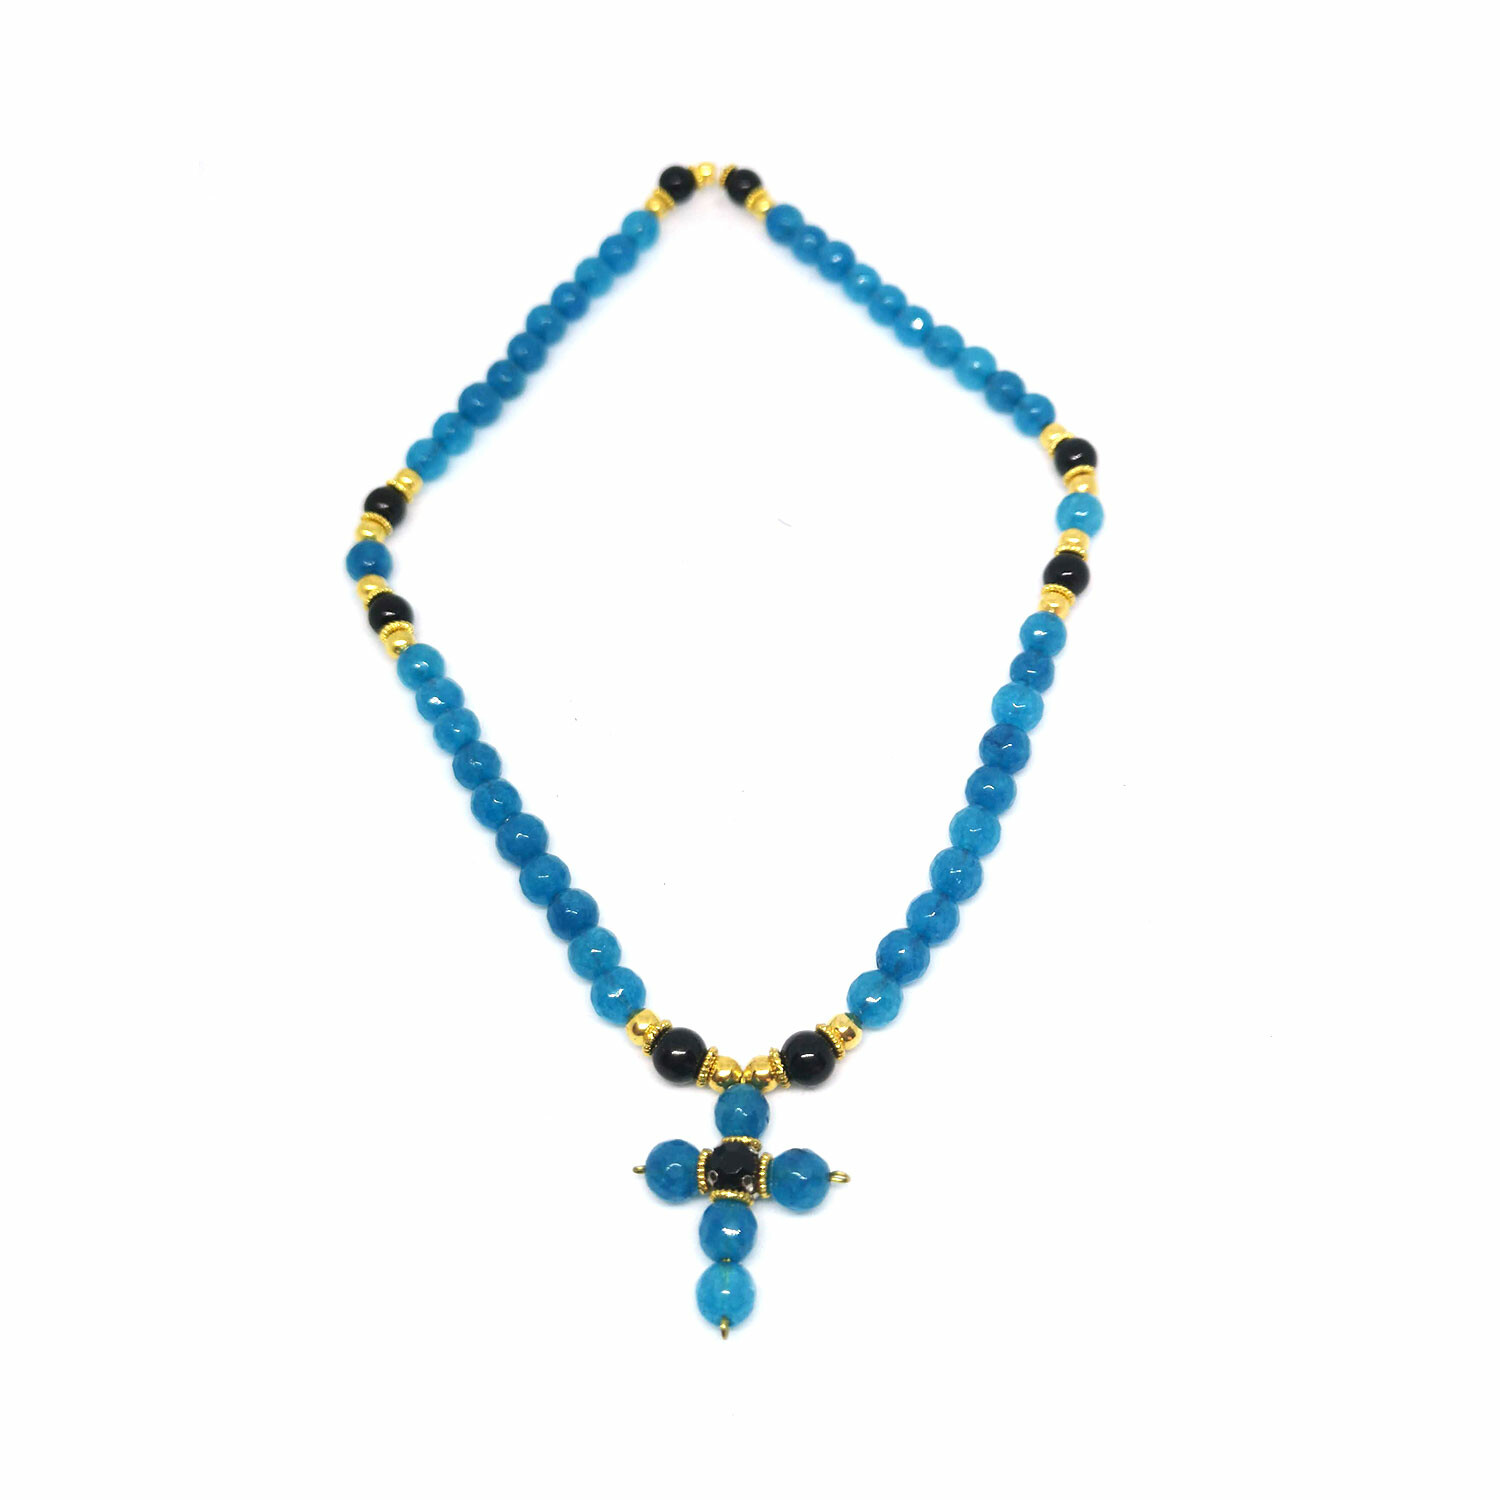 Athos' Rosary with the cross